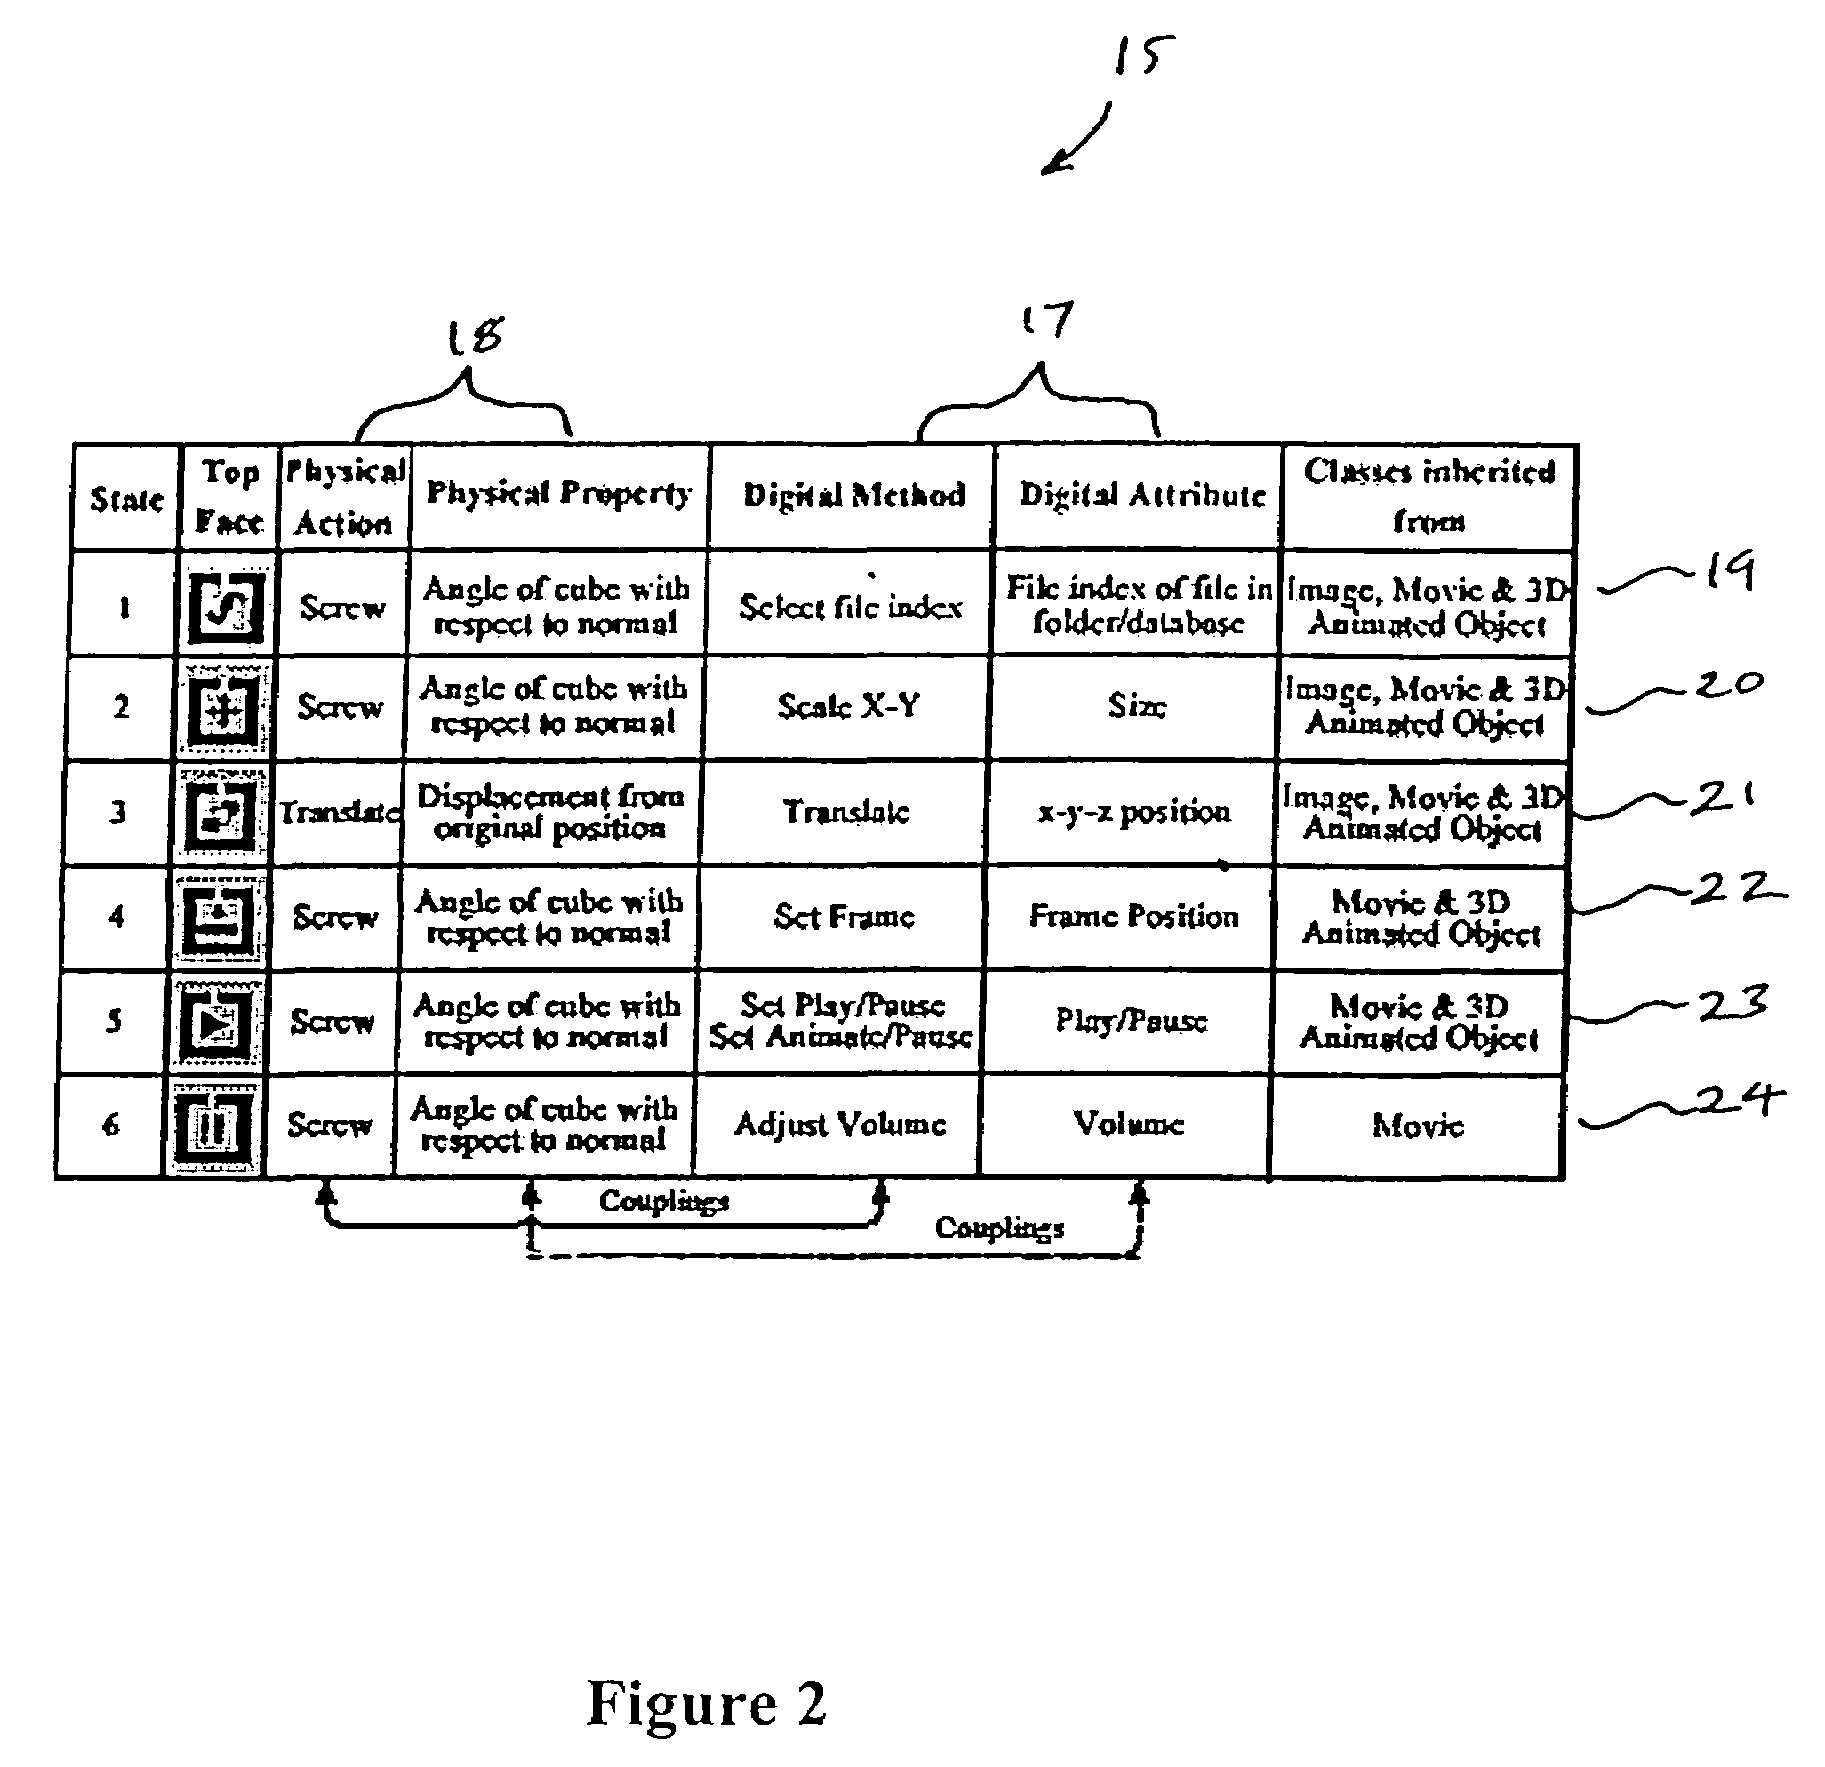 Interactive system and method